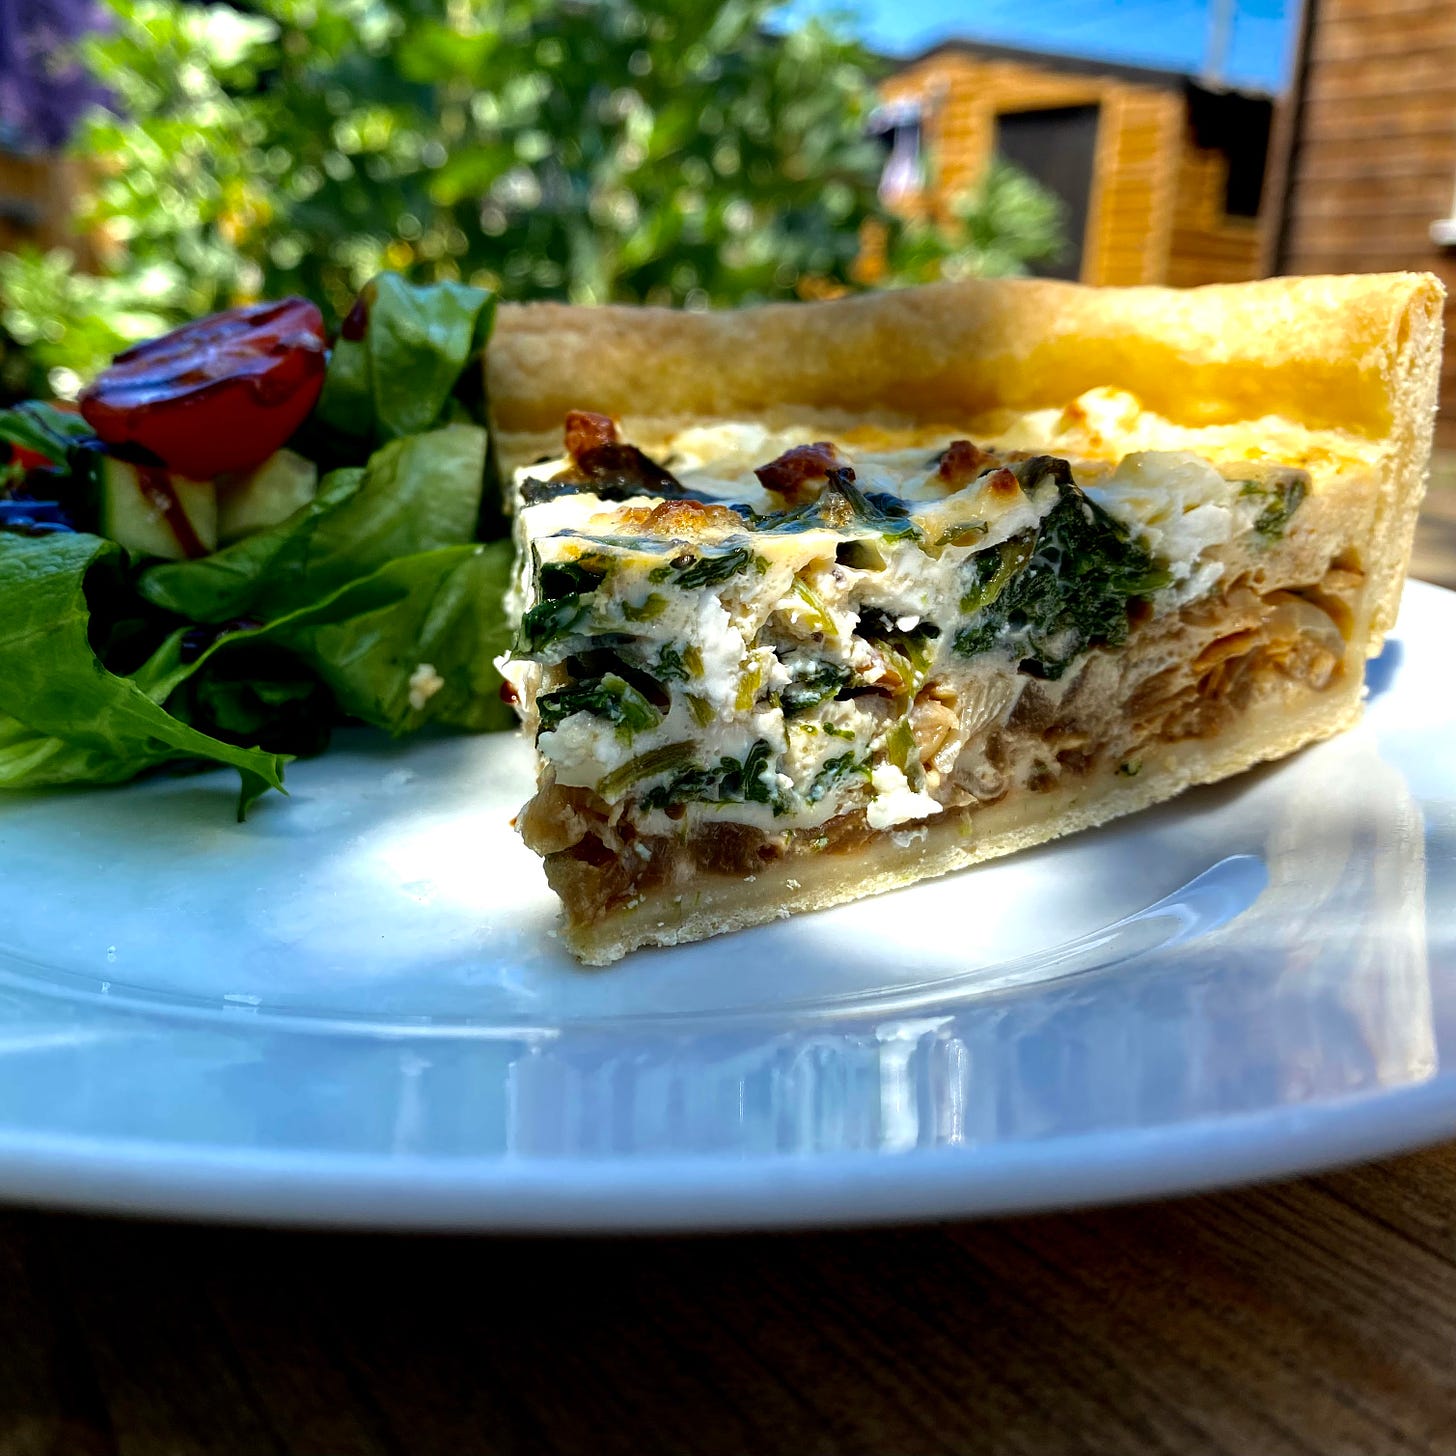 close-up picture of a spinach and cheese tart, side salad to the side on a white plate. Wooden buildings and foliage in the background.